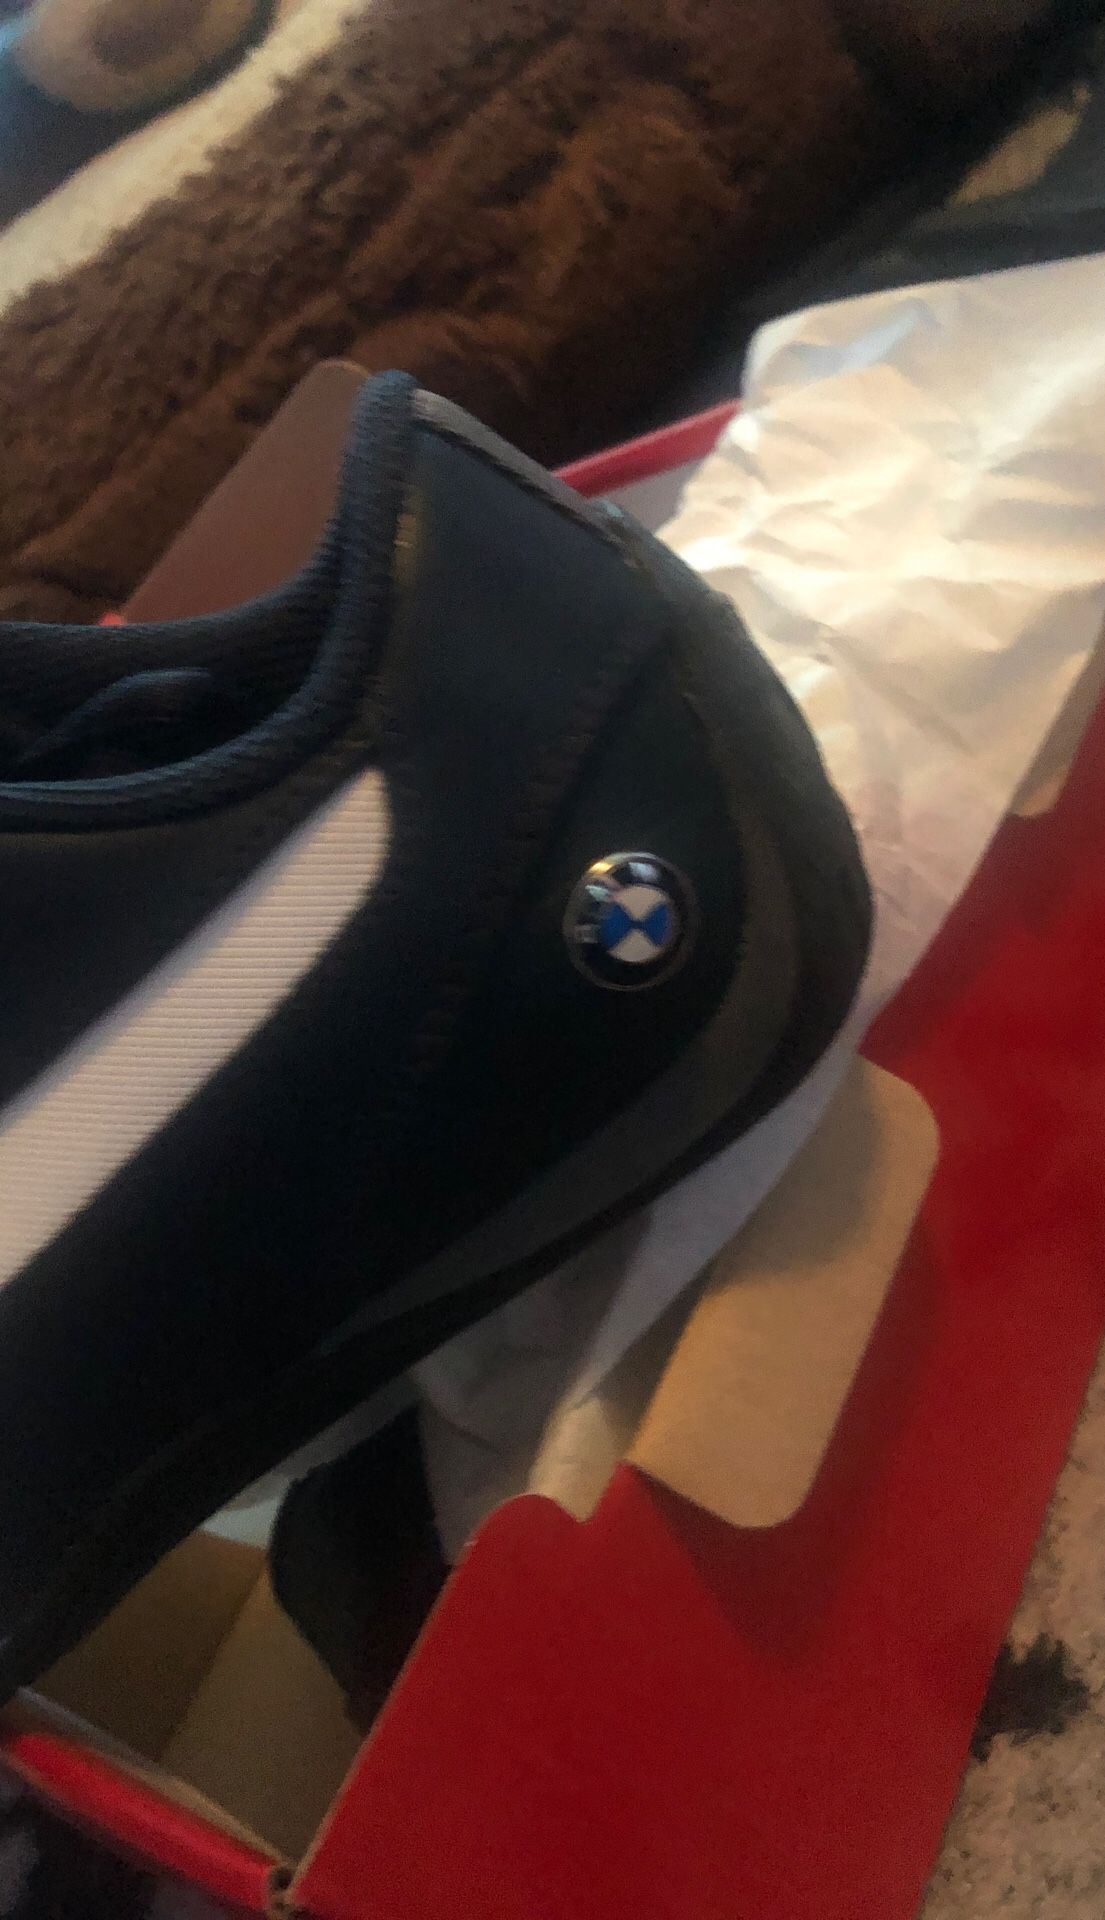 BMW shoes